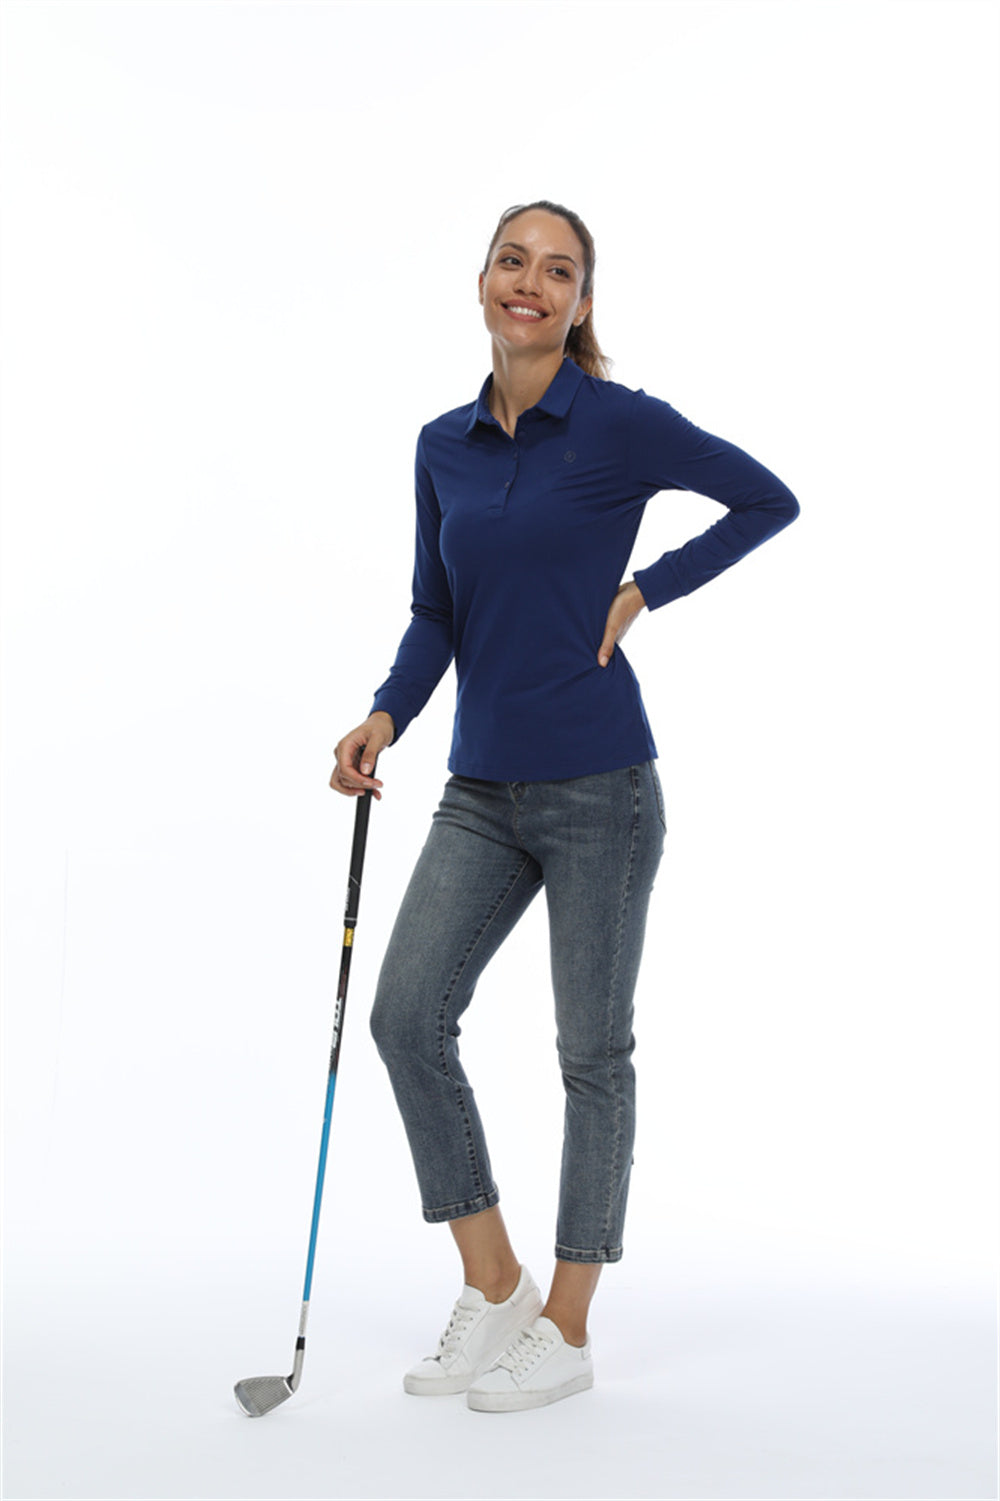 Female modelling a navy sun protection shirt while holing onto a golfclub. 